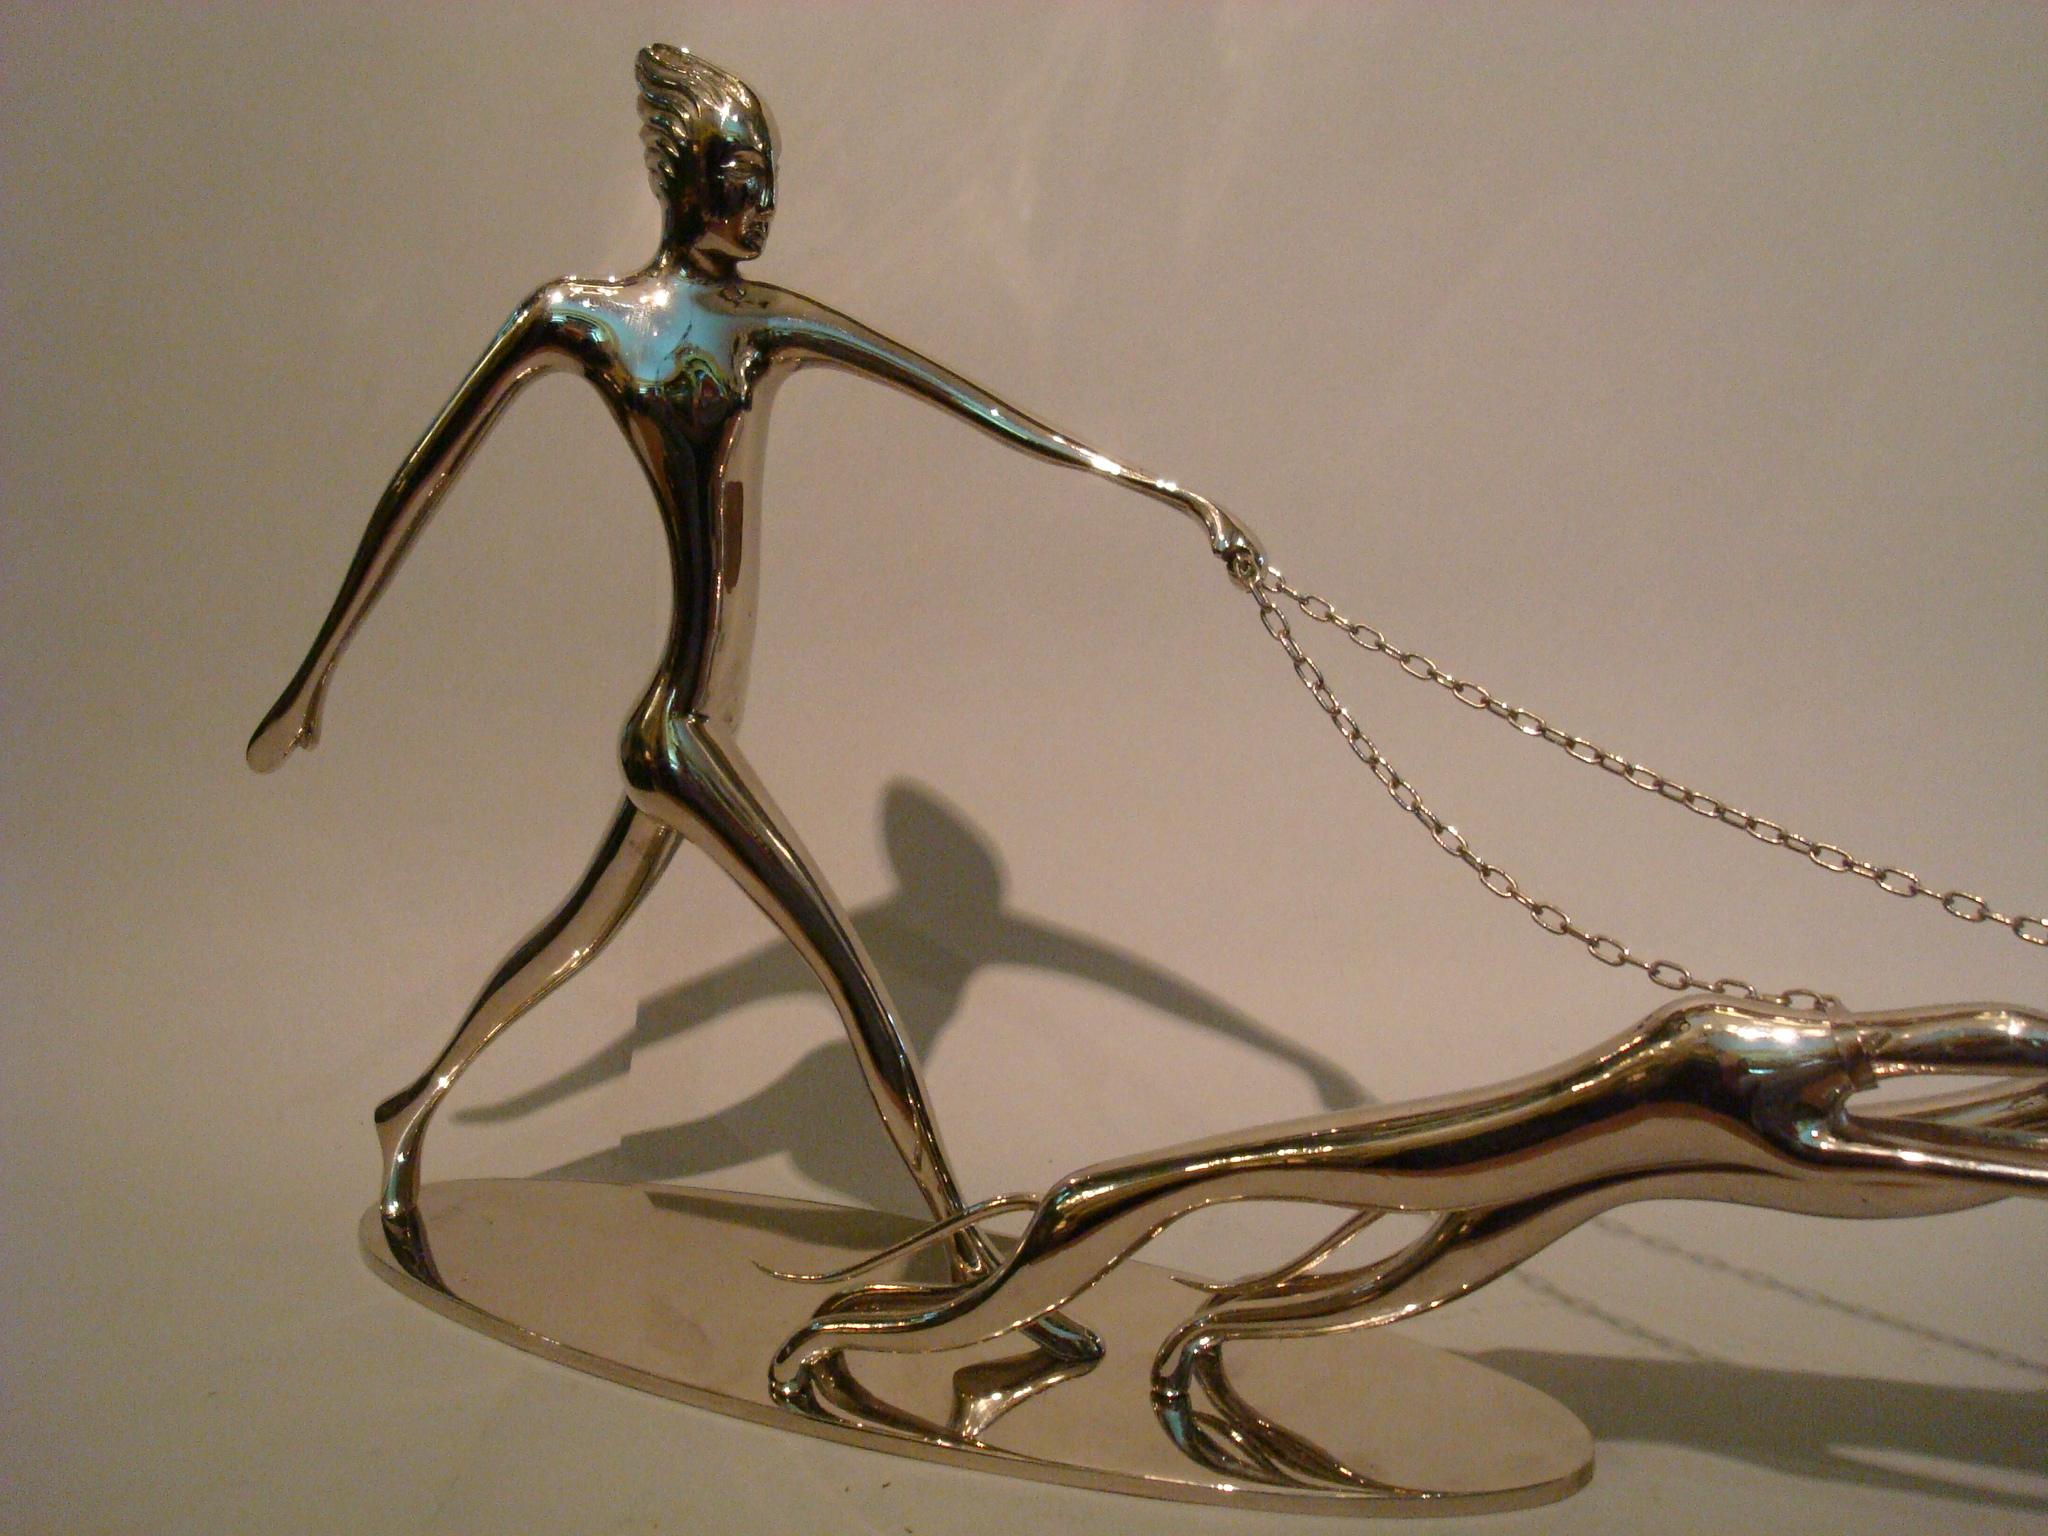 This dynamic sculpture was designed by Austrian sculptor Karl Hagenauer, known for his iconic Art Deco decorative objects and furniture designs. This piece is composed of nickel-plated brass and features the highly stylized image of a woman, the